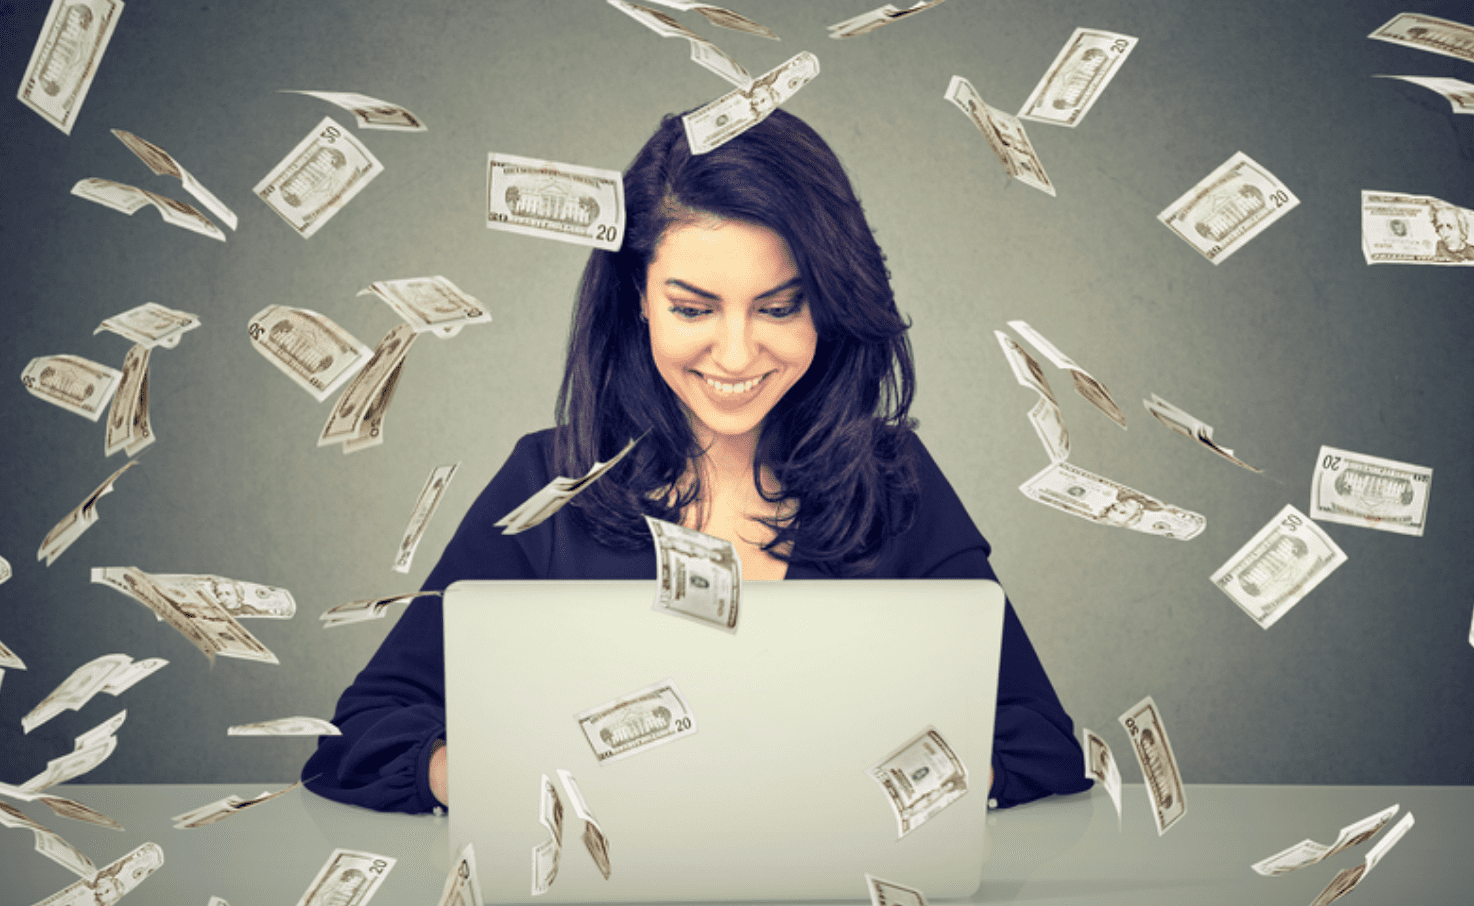 How to Make Money in the “Make Money Online” Niche Even if You’re a Total Rookie